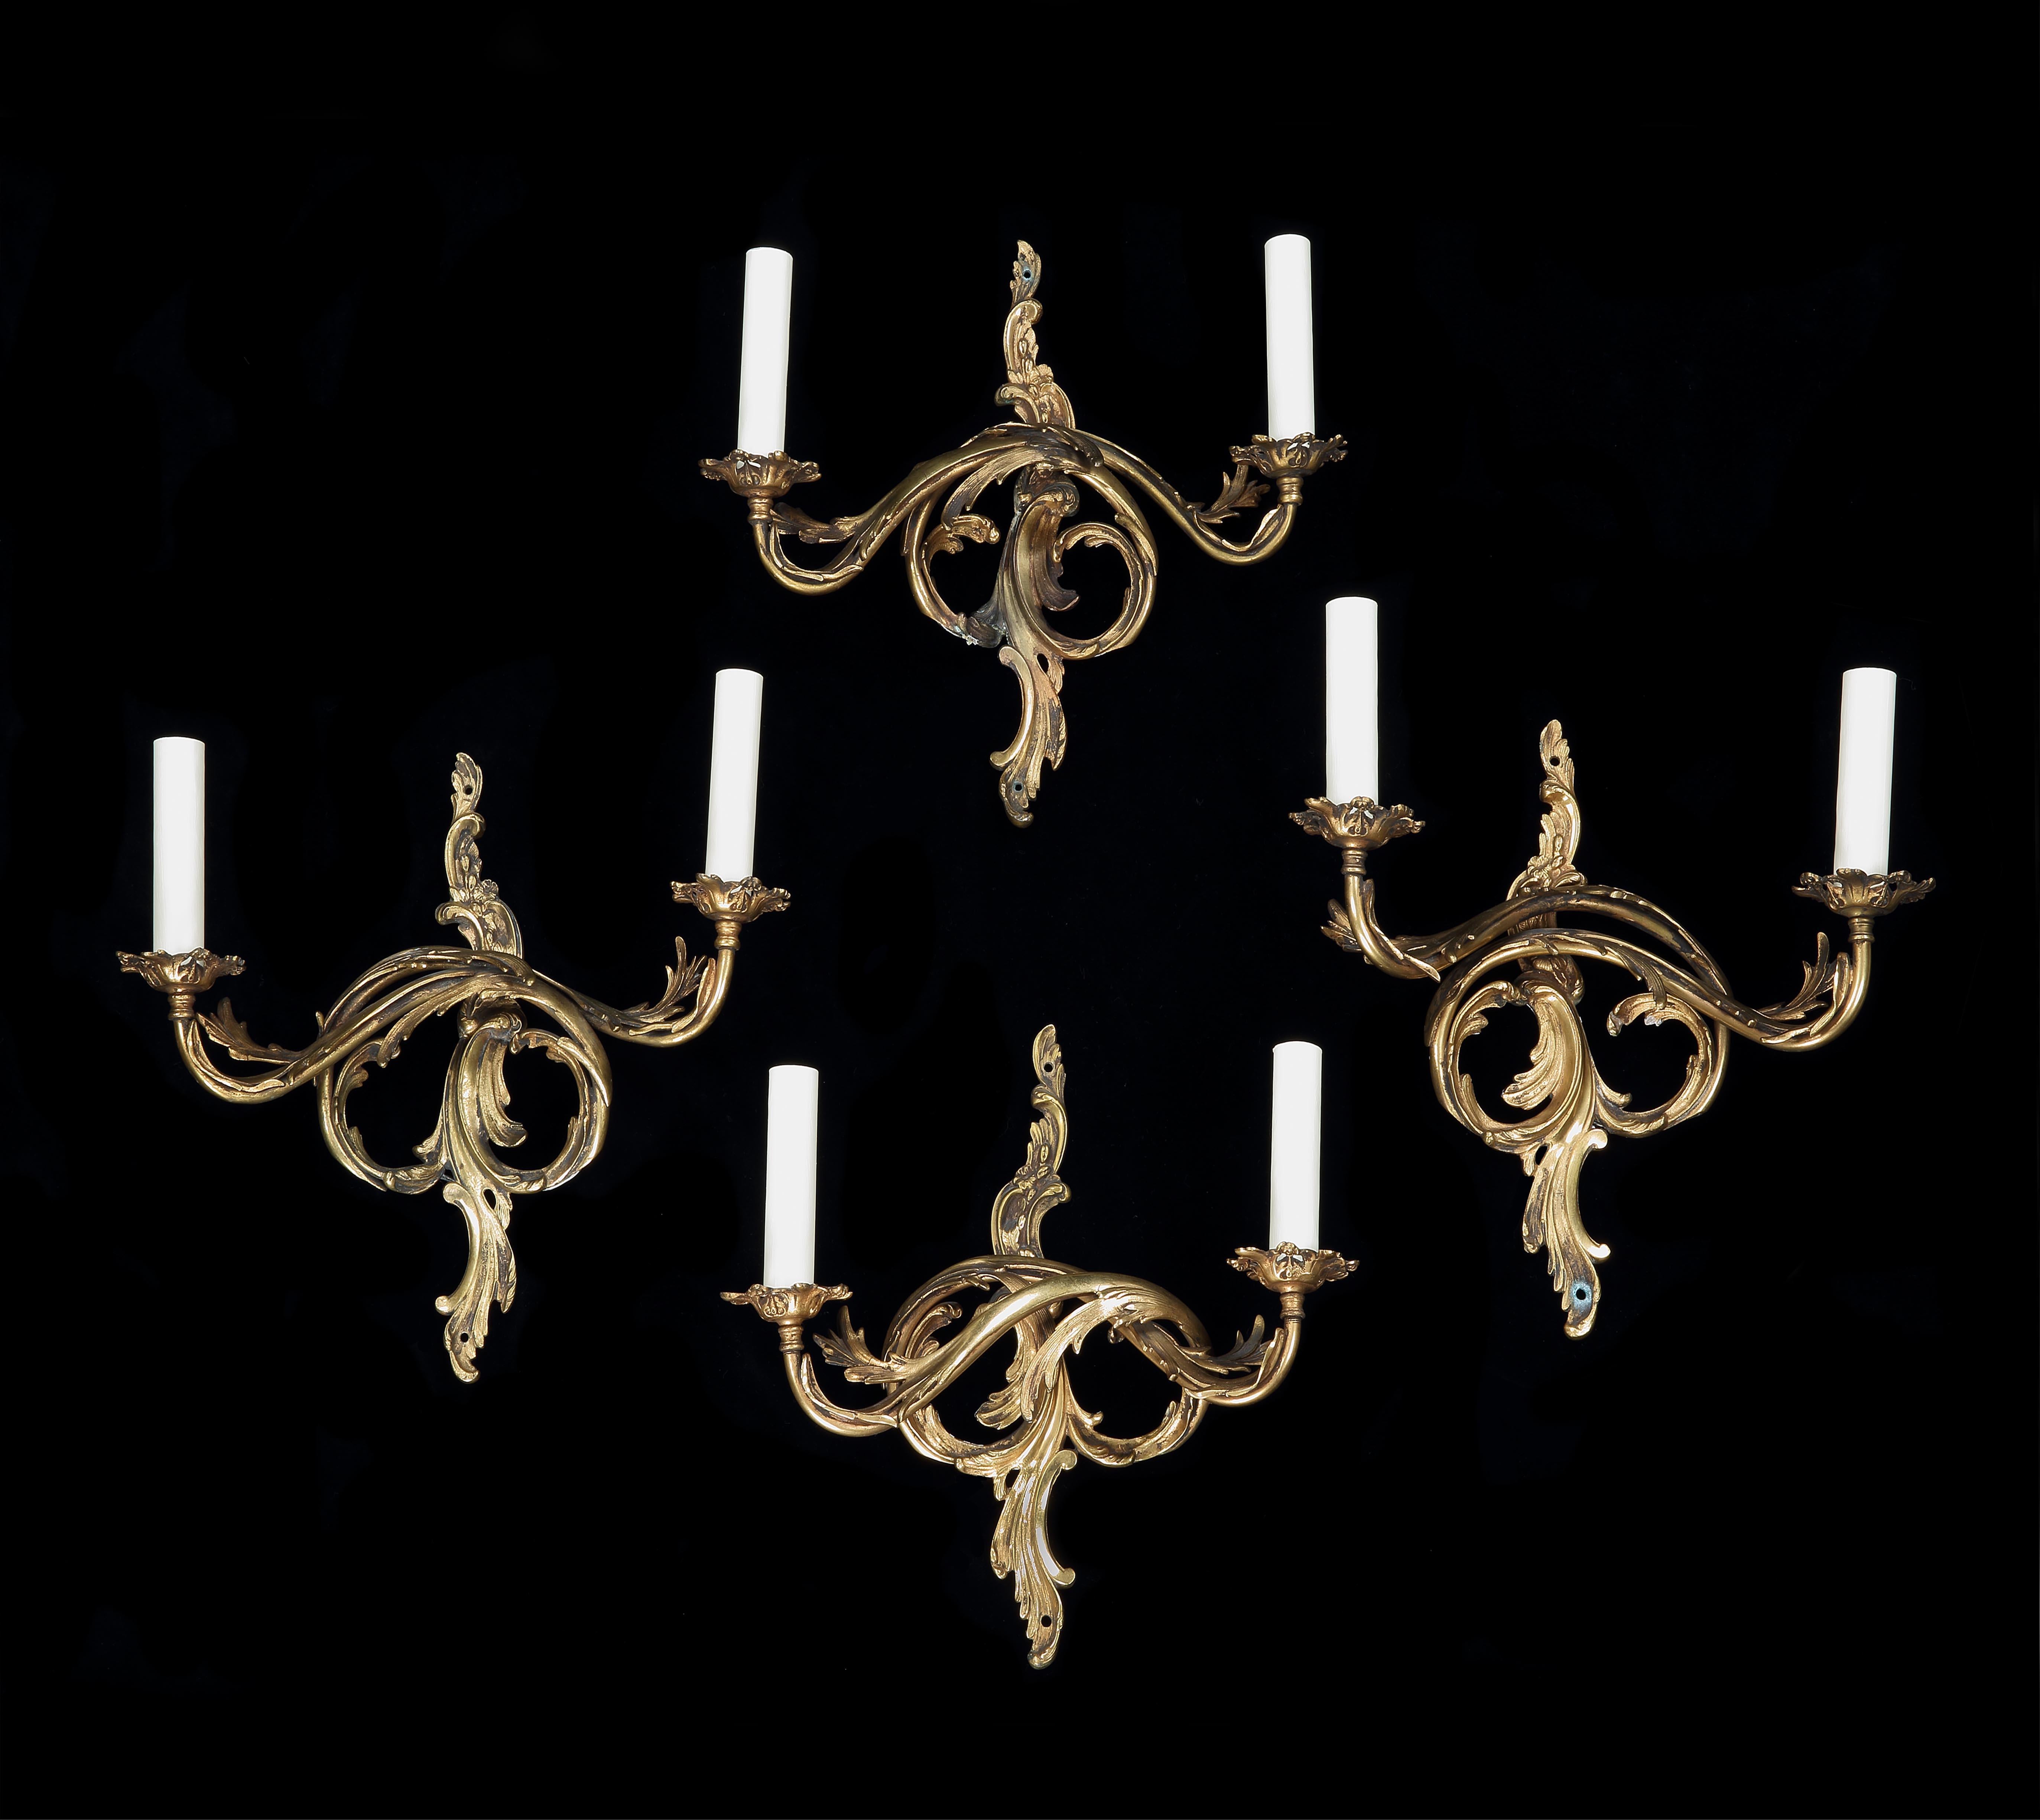 A set of four, Italian, ormolu, neoclassical, two arm/branch, electrified, acanthus leaf, wall sconces,

-Fluid, naturalistic, classical form, in one continuous, scrolling piece
-Fluid acanthus leaf form in one piece with the branches projecting